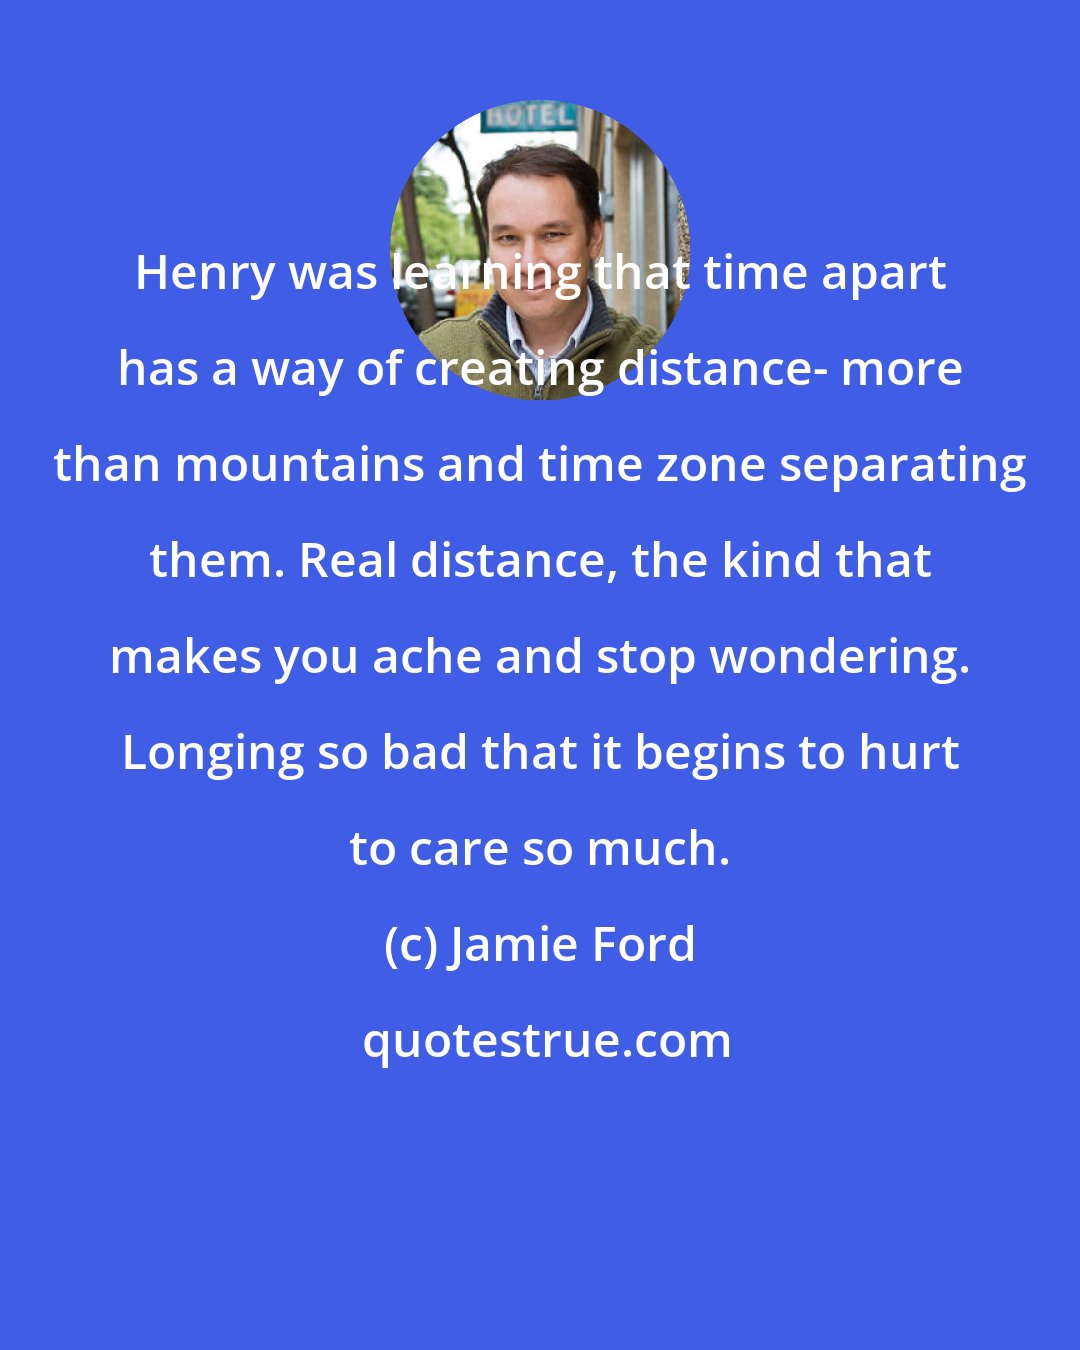 Jamie Ford: Henry was learning that time apart has a way of creating distance- more than mountains and time zone separating them. Real distance, the kind that makes you ache and stop wondering. Longing so bad that it begins to hurt to care so much.